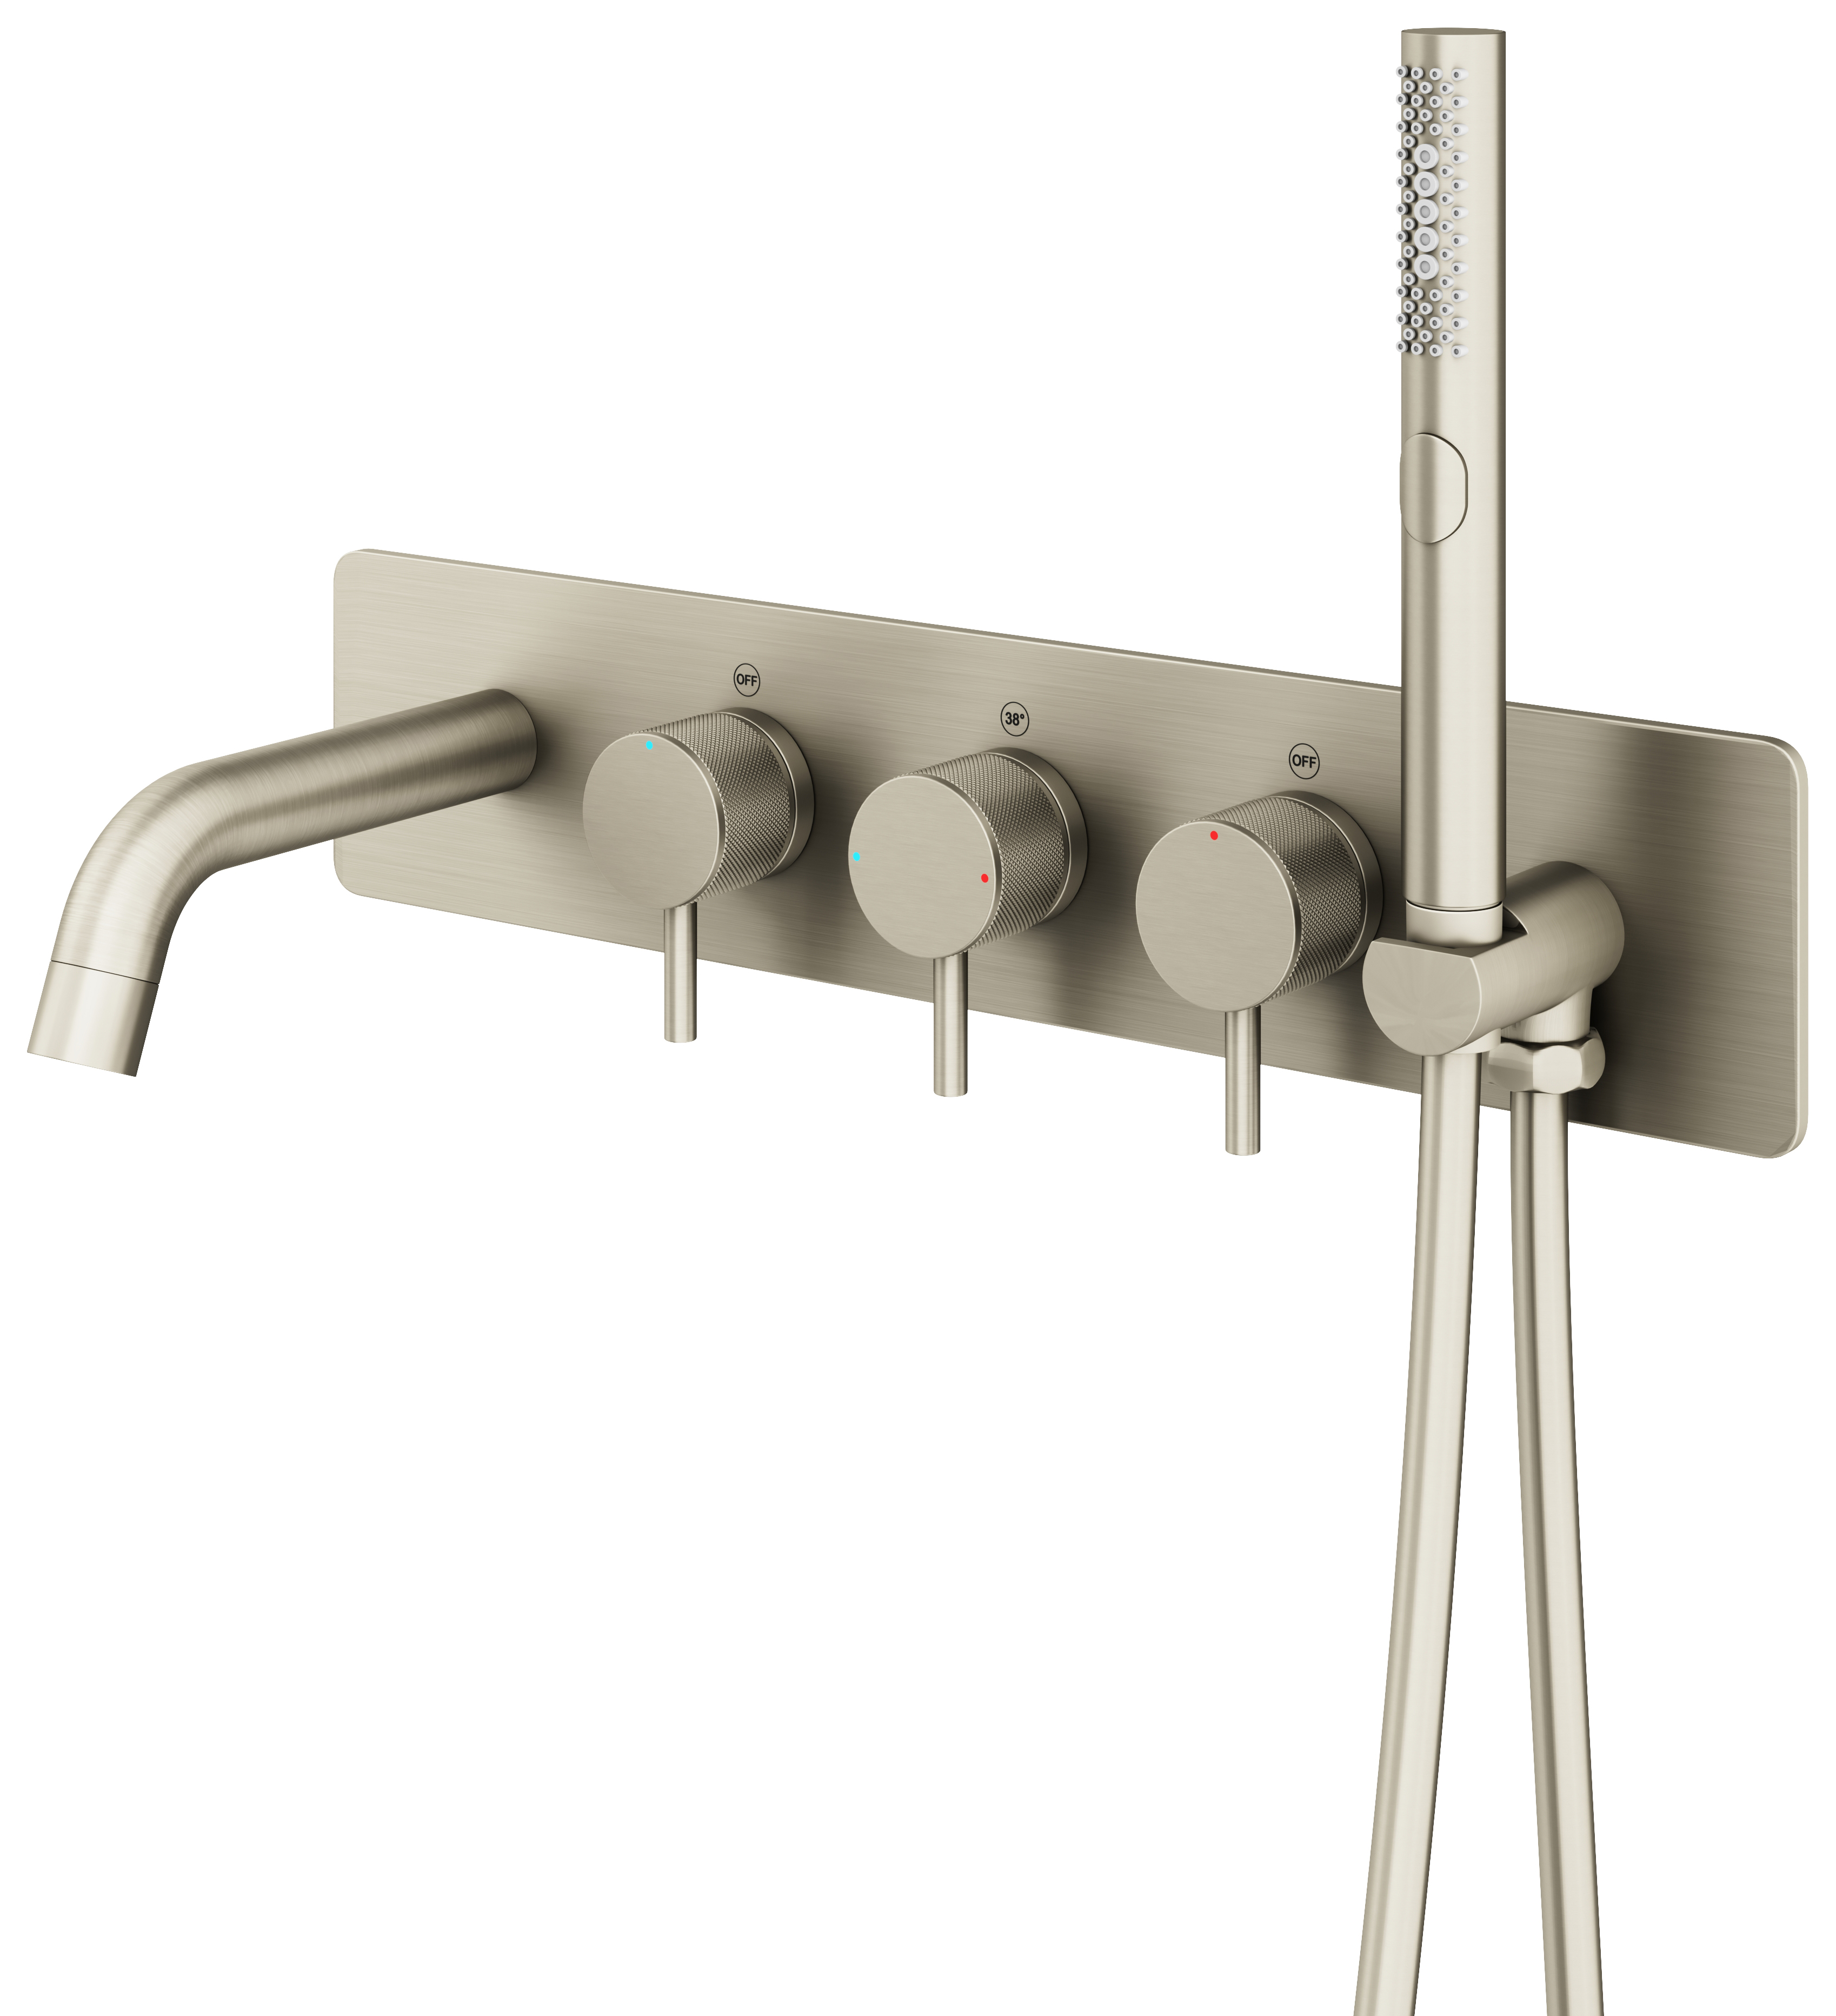 Melbury Pro Wall Mounted Concealed Bath Shower Mixer - Brushed Nickel